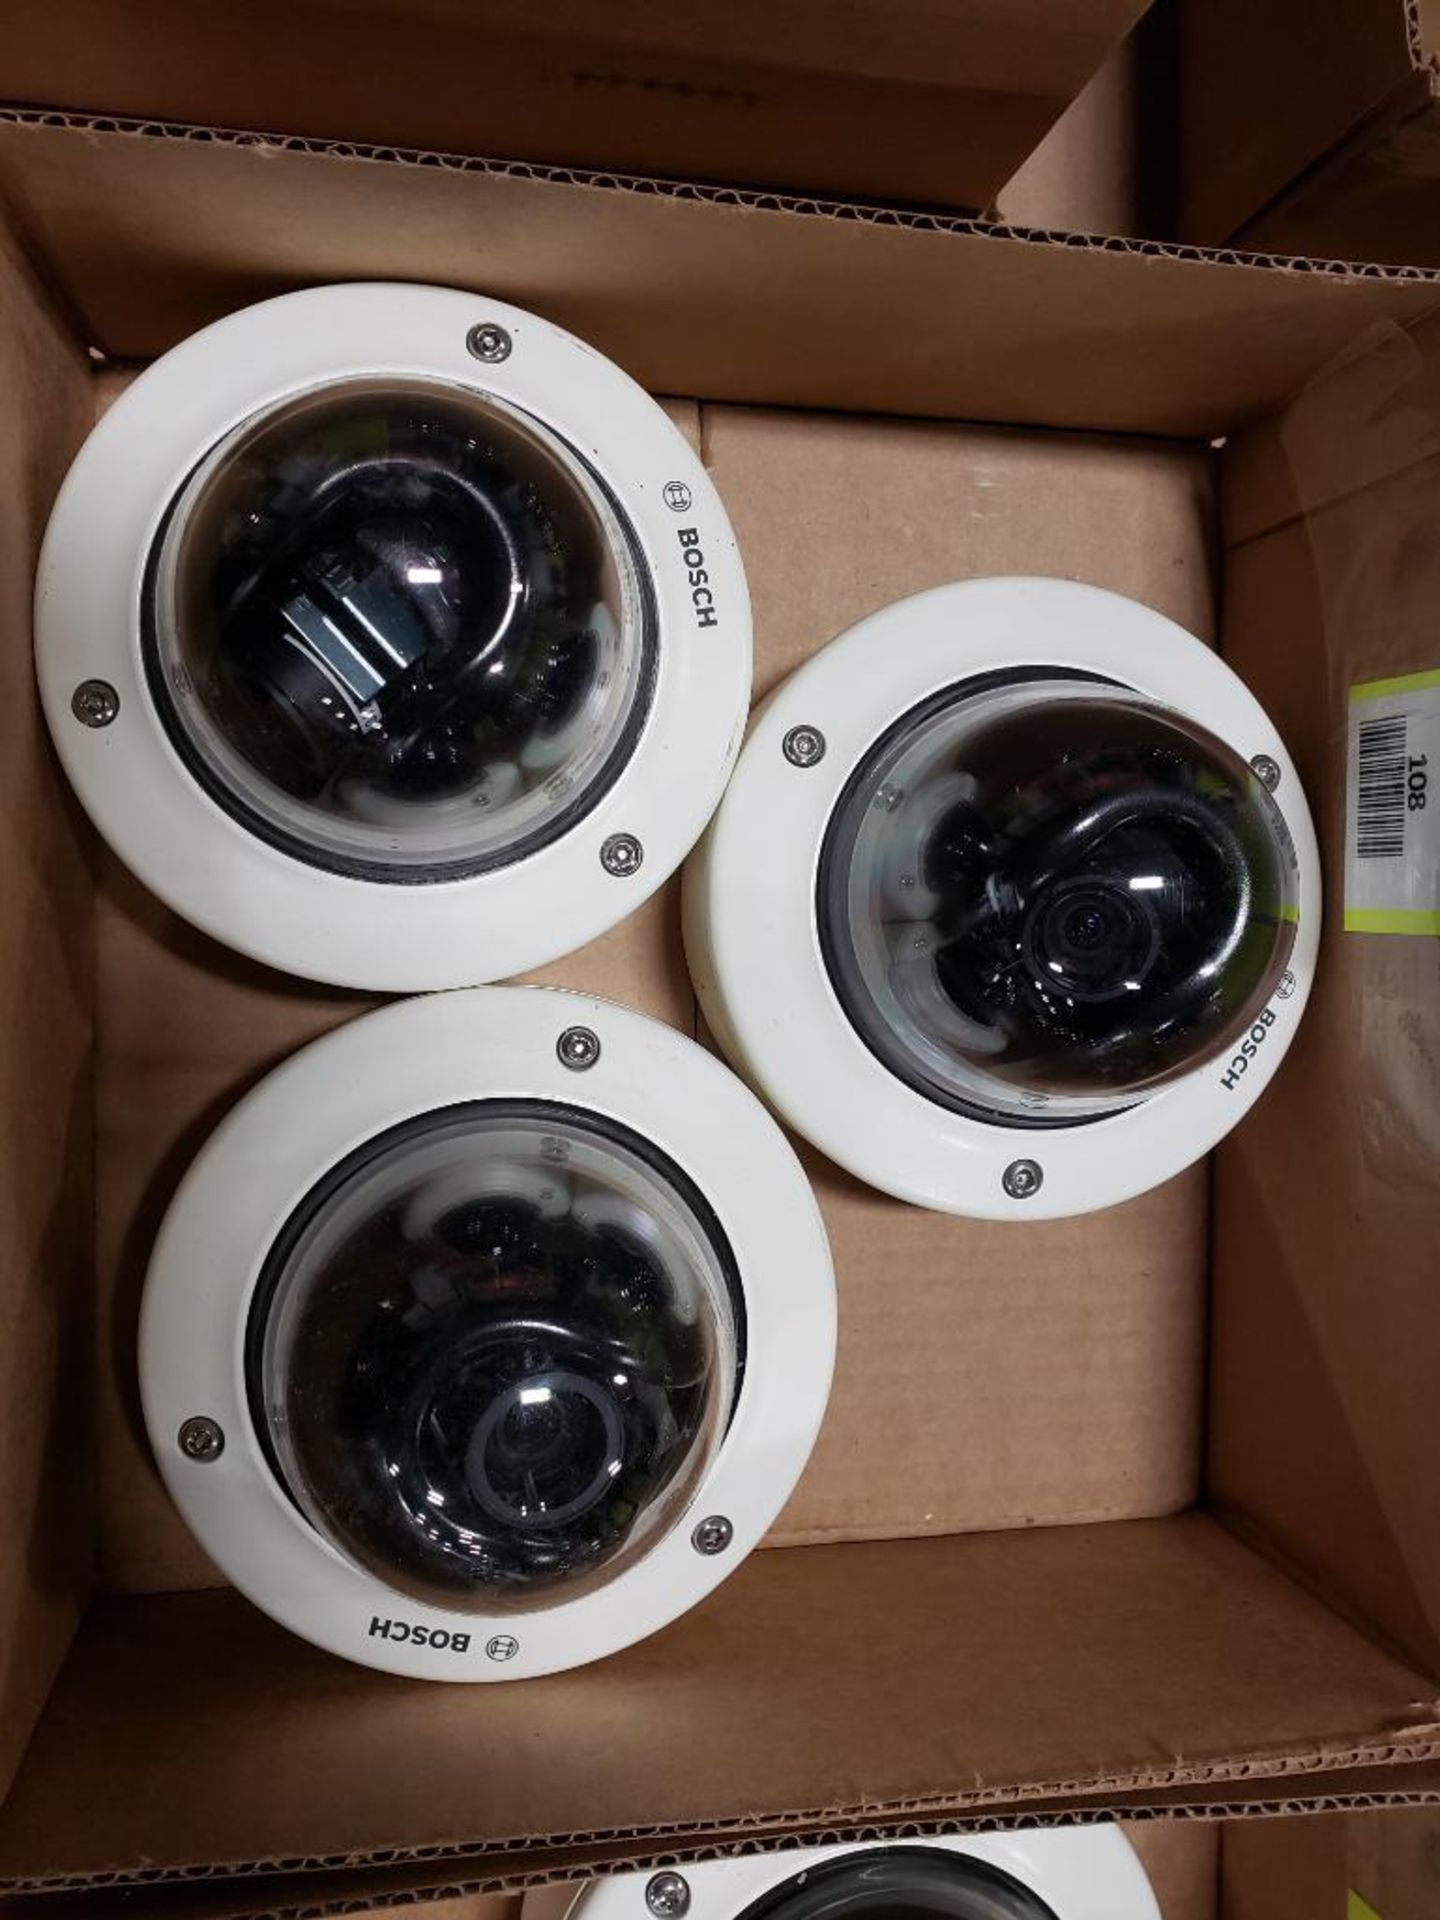 Lot of 3 Bosch Security CameraLot of 3 Bosch Security Camera. VDC-485V03-20 Cam Dome. - Image 2 of 3